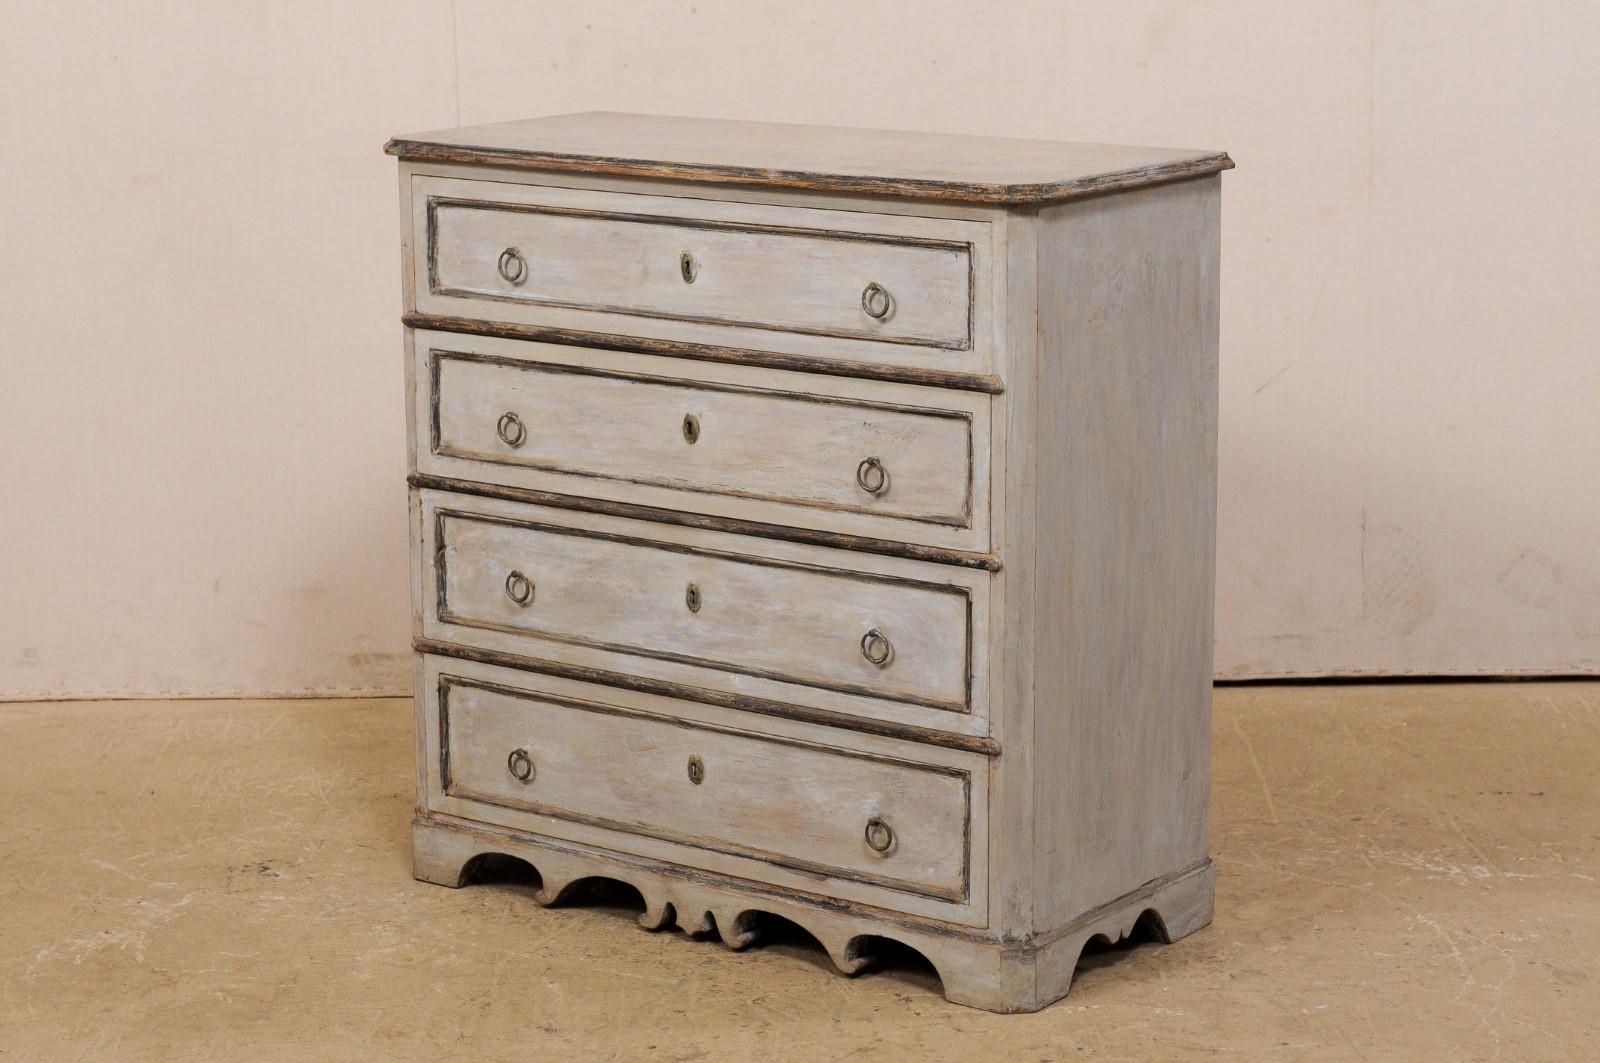 19th Century Swedish Karl Johan Painted Wood Chest with Ornately Carved Skirt